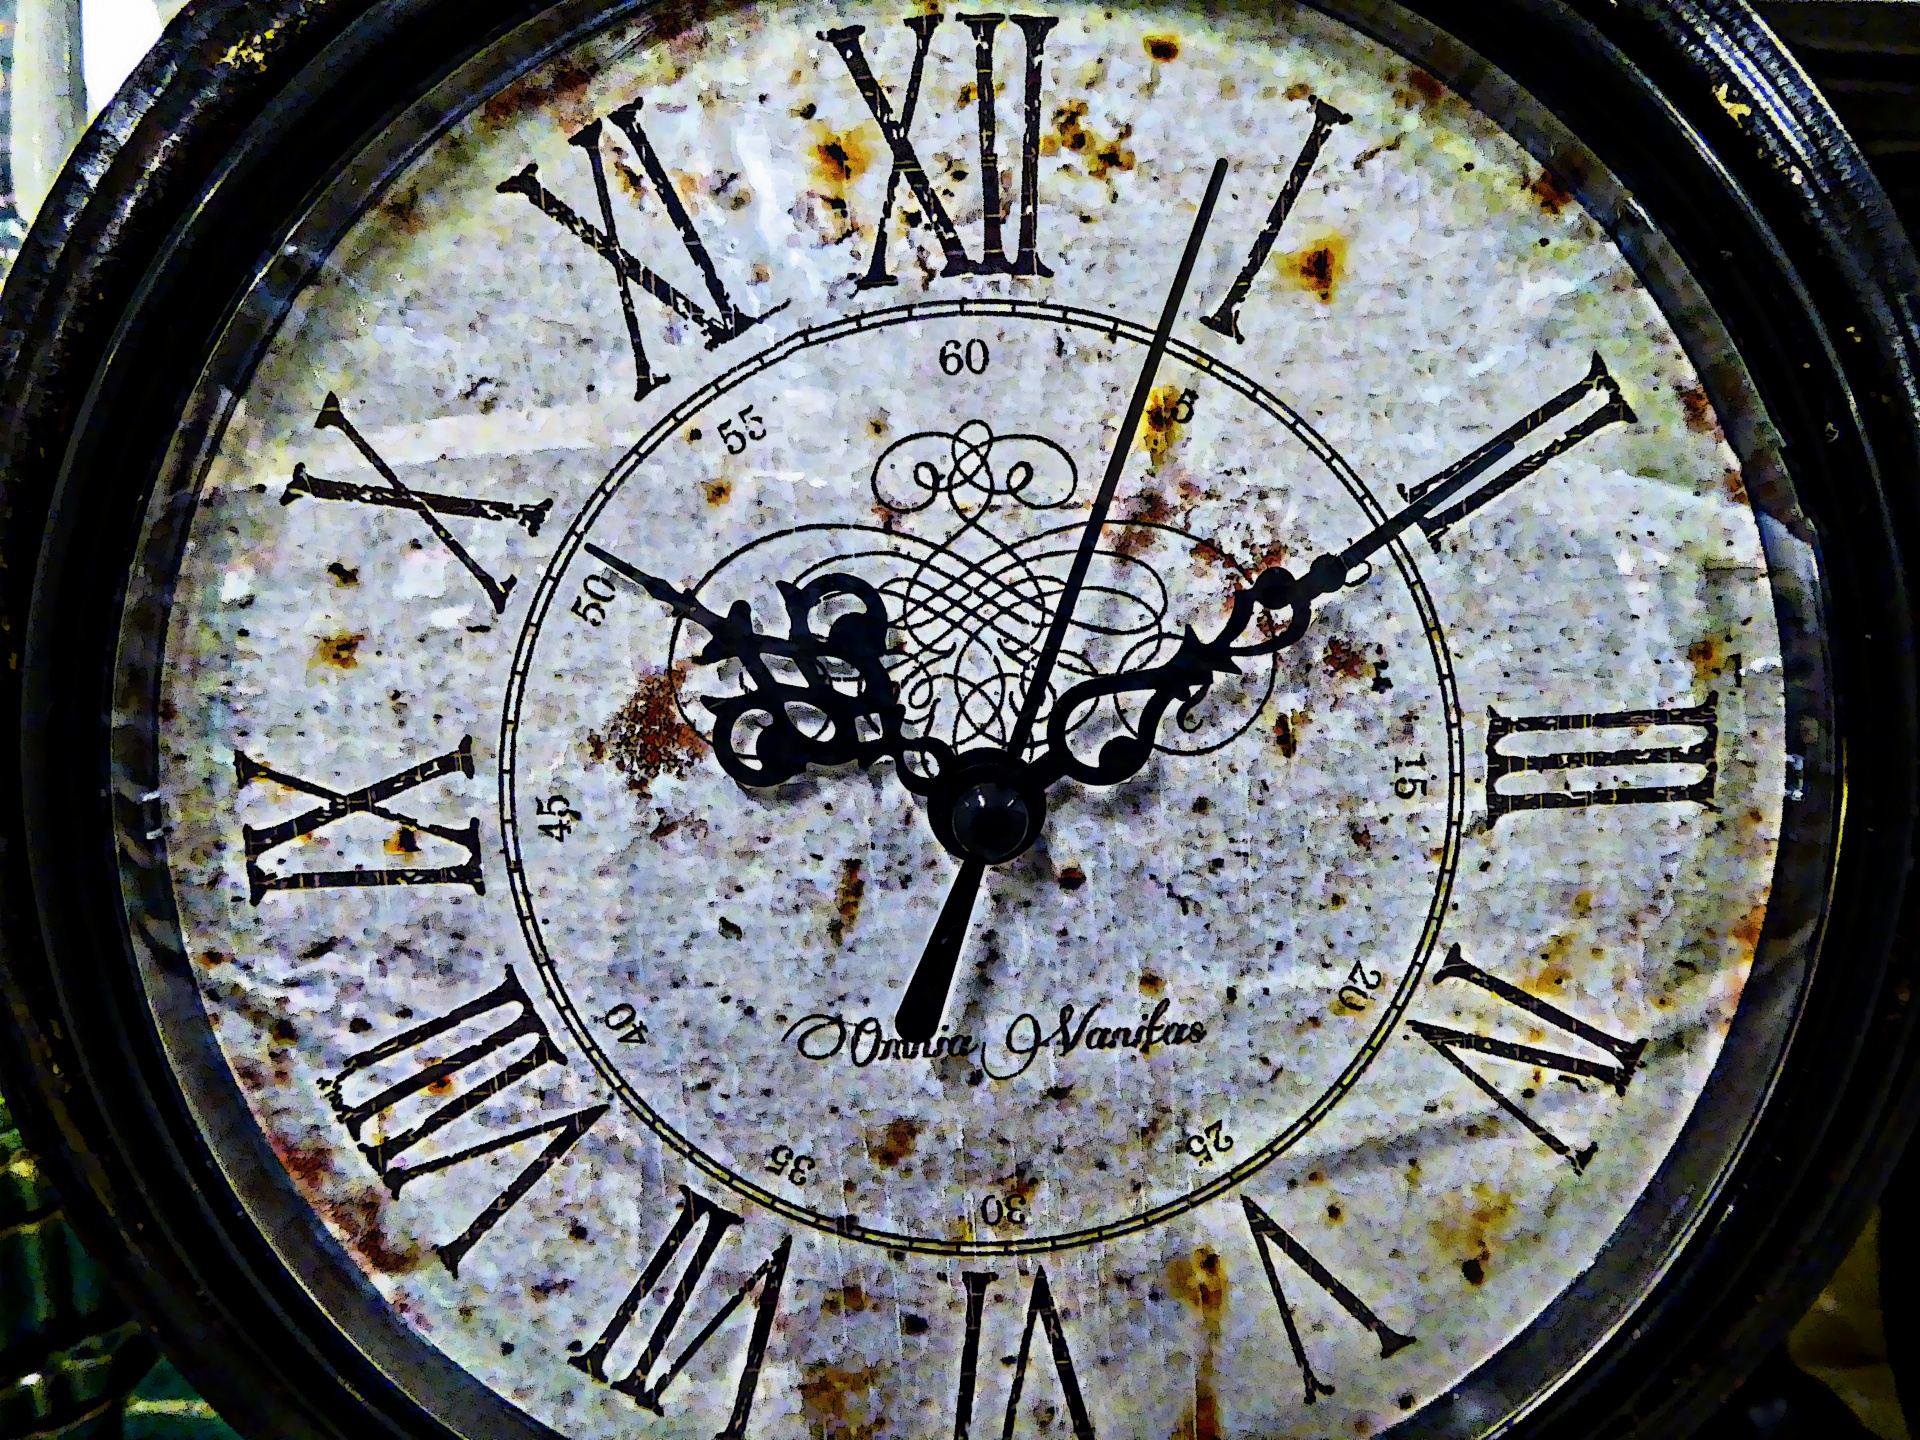 roman numeral clock face with artistic elements applied